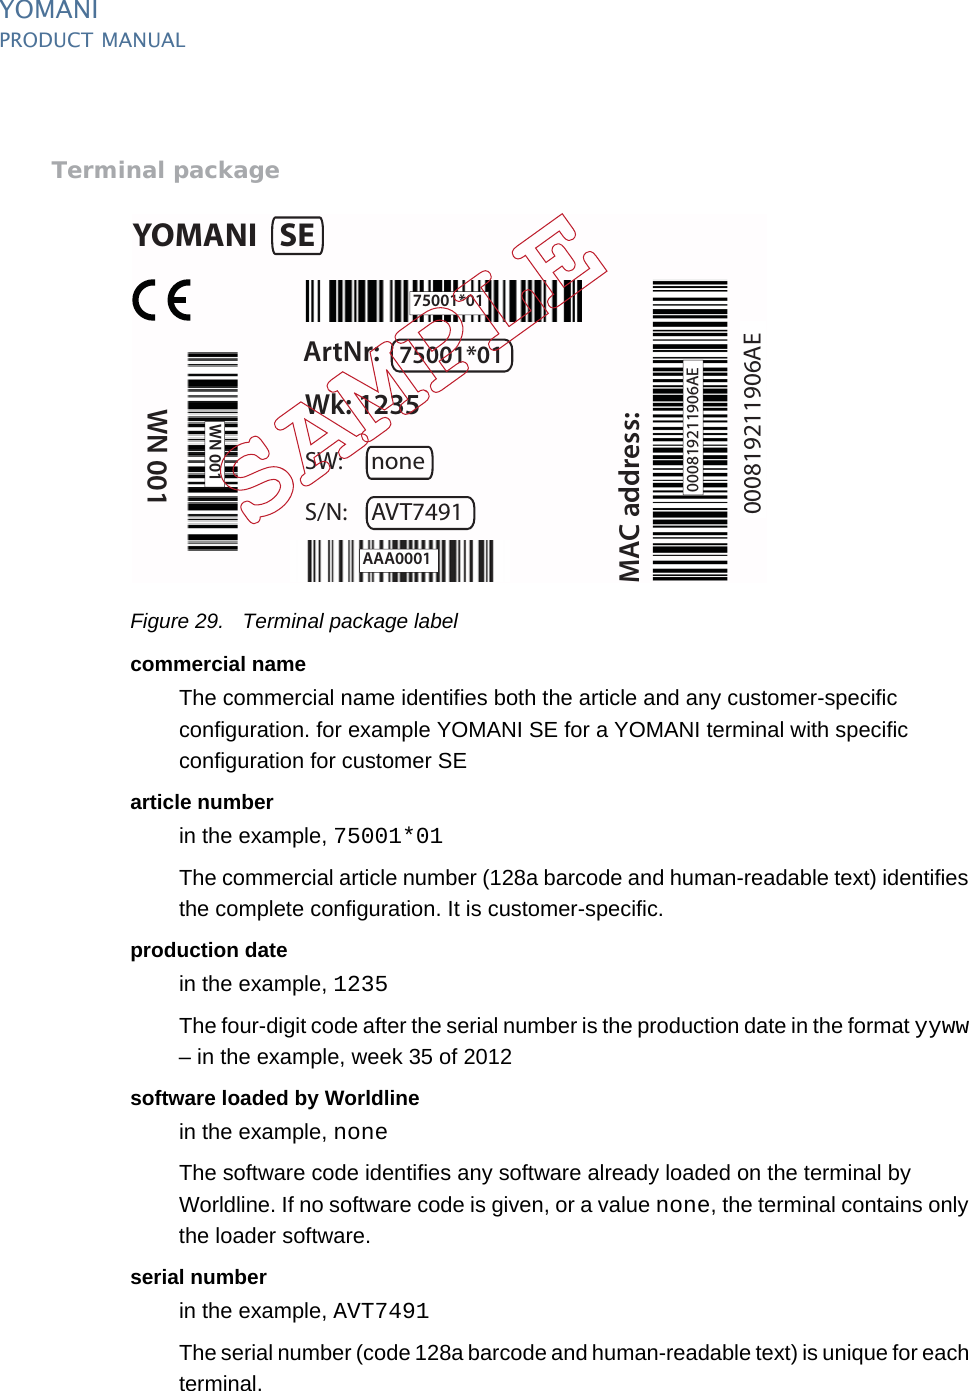 PUBLIC 35pm_ymn_logistics.fm document release 2.1 last updated 8/11/13YOMANIPRODUCT MANUALTerminal packageFigure 29. Terminal package labelcommercial nameThe commercial name identifies both the article and any customer-specific configuration. for example YOMANI SE for a YOMANI terminal with specific configuration for customer SEarticle numberin the example, 75001*01The commercial article number (128a barcode and human-readable text) identifies the complete configuration. It is customer-specific.production datein the example, 1235The four-digit code after the serial number is the production date in the format yyww – in the example, week 35 of 2012software loaded by Worldlinein the example, noneThe software code identifies any software already loaded on the terminal by Worldline. If no software code is given, or a value none, the terminal contains only the loader software.serial numberin the example, AVT7491The serial number (code 128a barcode and human-readable text) is unique for each terminal.YOMANI SEArtNr: 75001*01Wk: 1235MAC address:WN 001SW: noneS/N: AVT749175001*01000819211906AE000819211906AEAAA0001WN 001